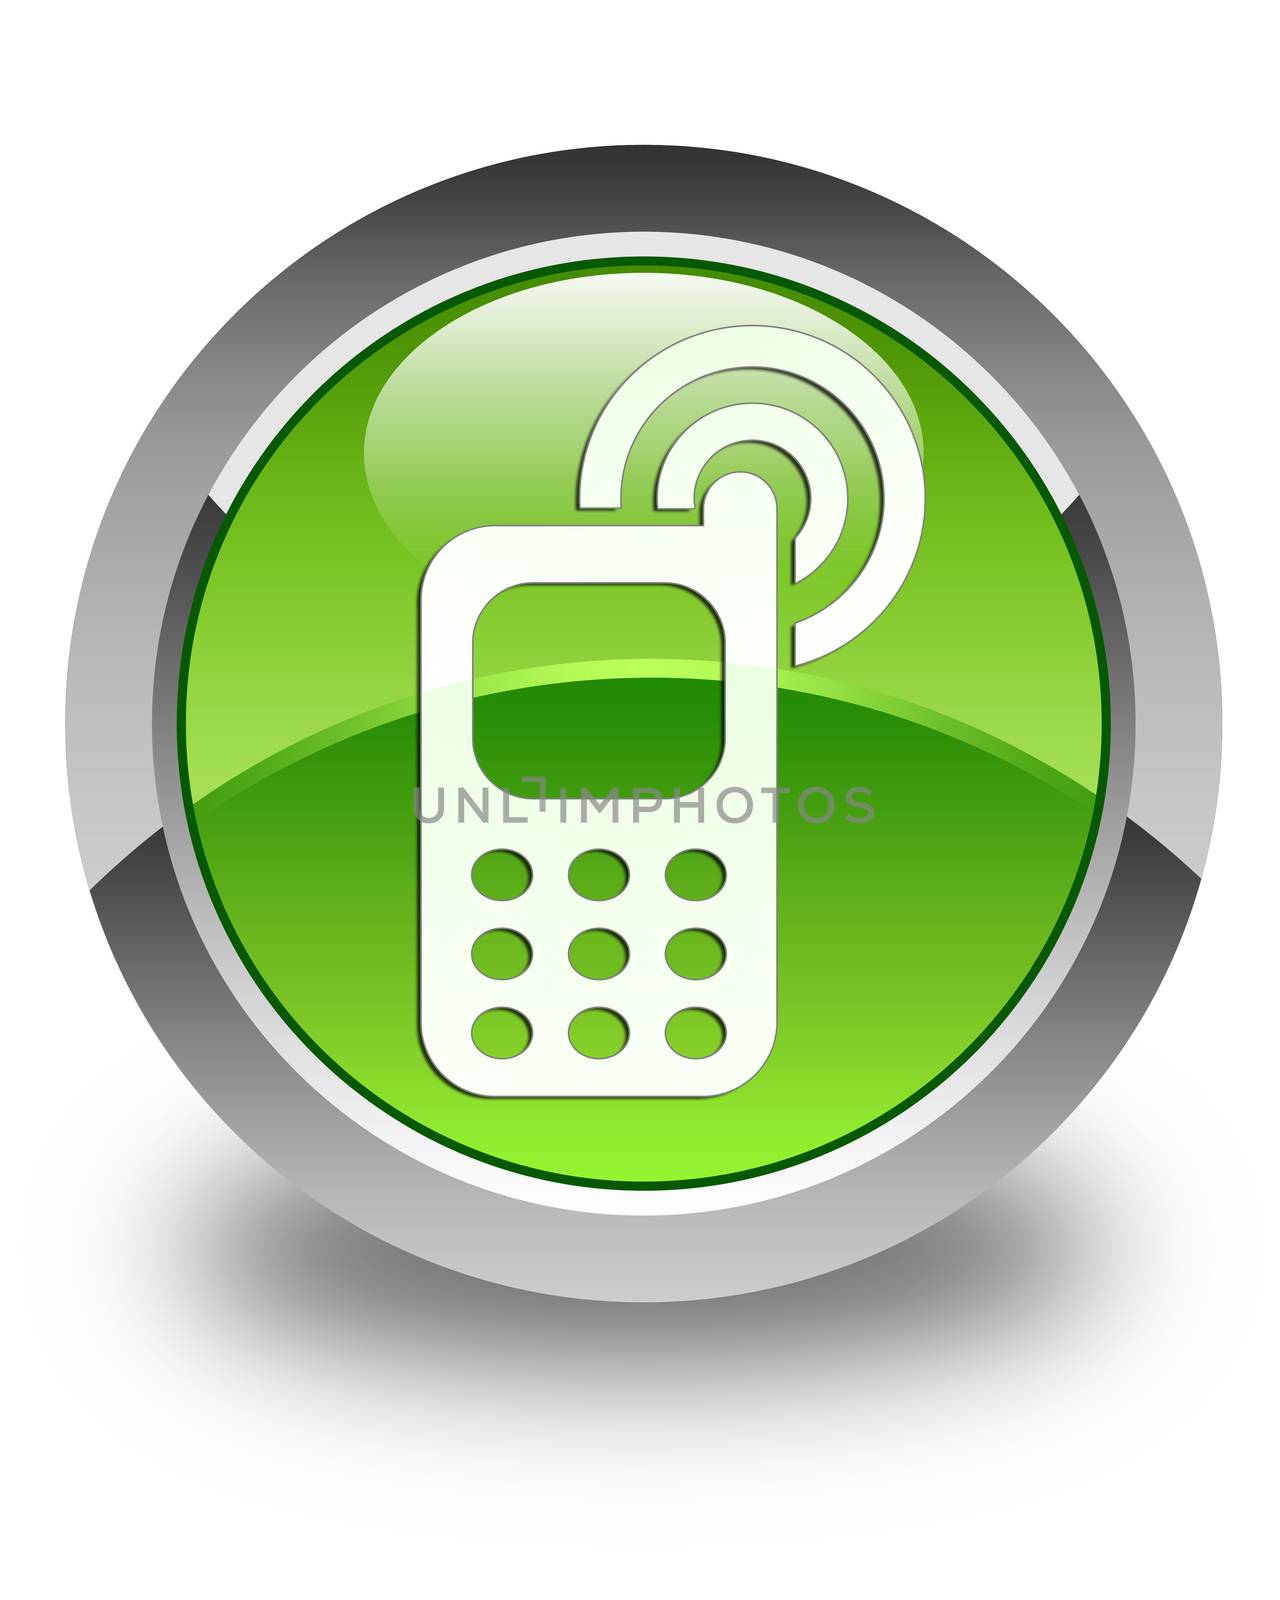 Cellphone ringing icon glossy green round button by faysalfarhan